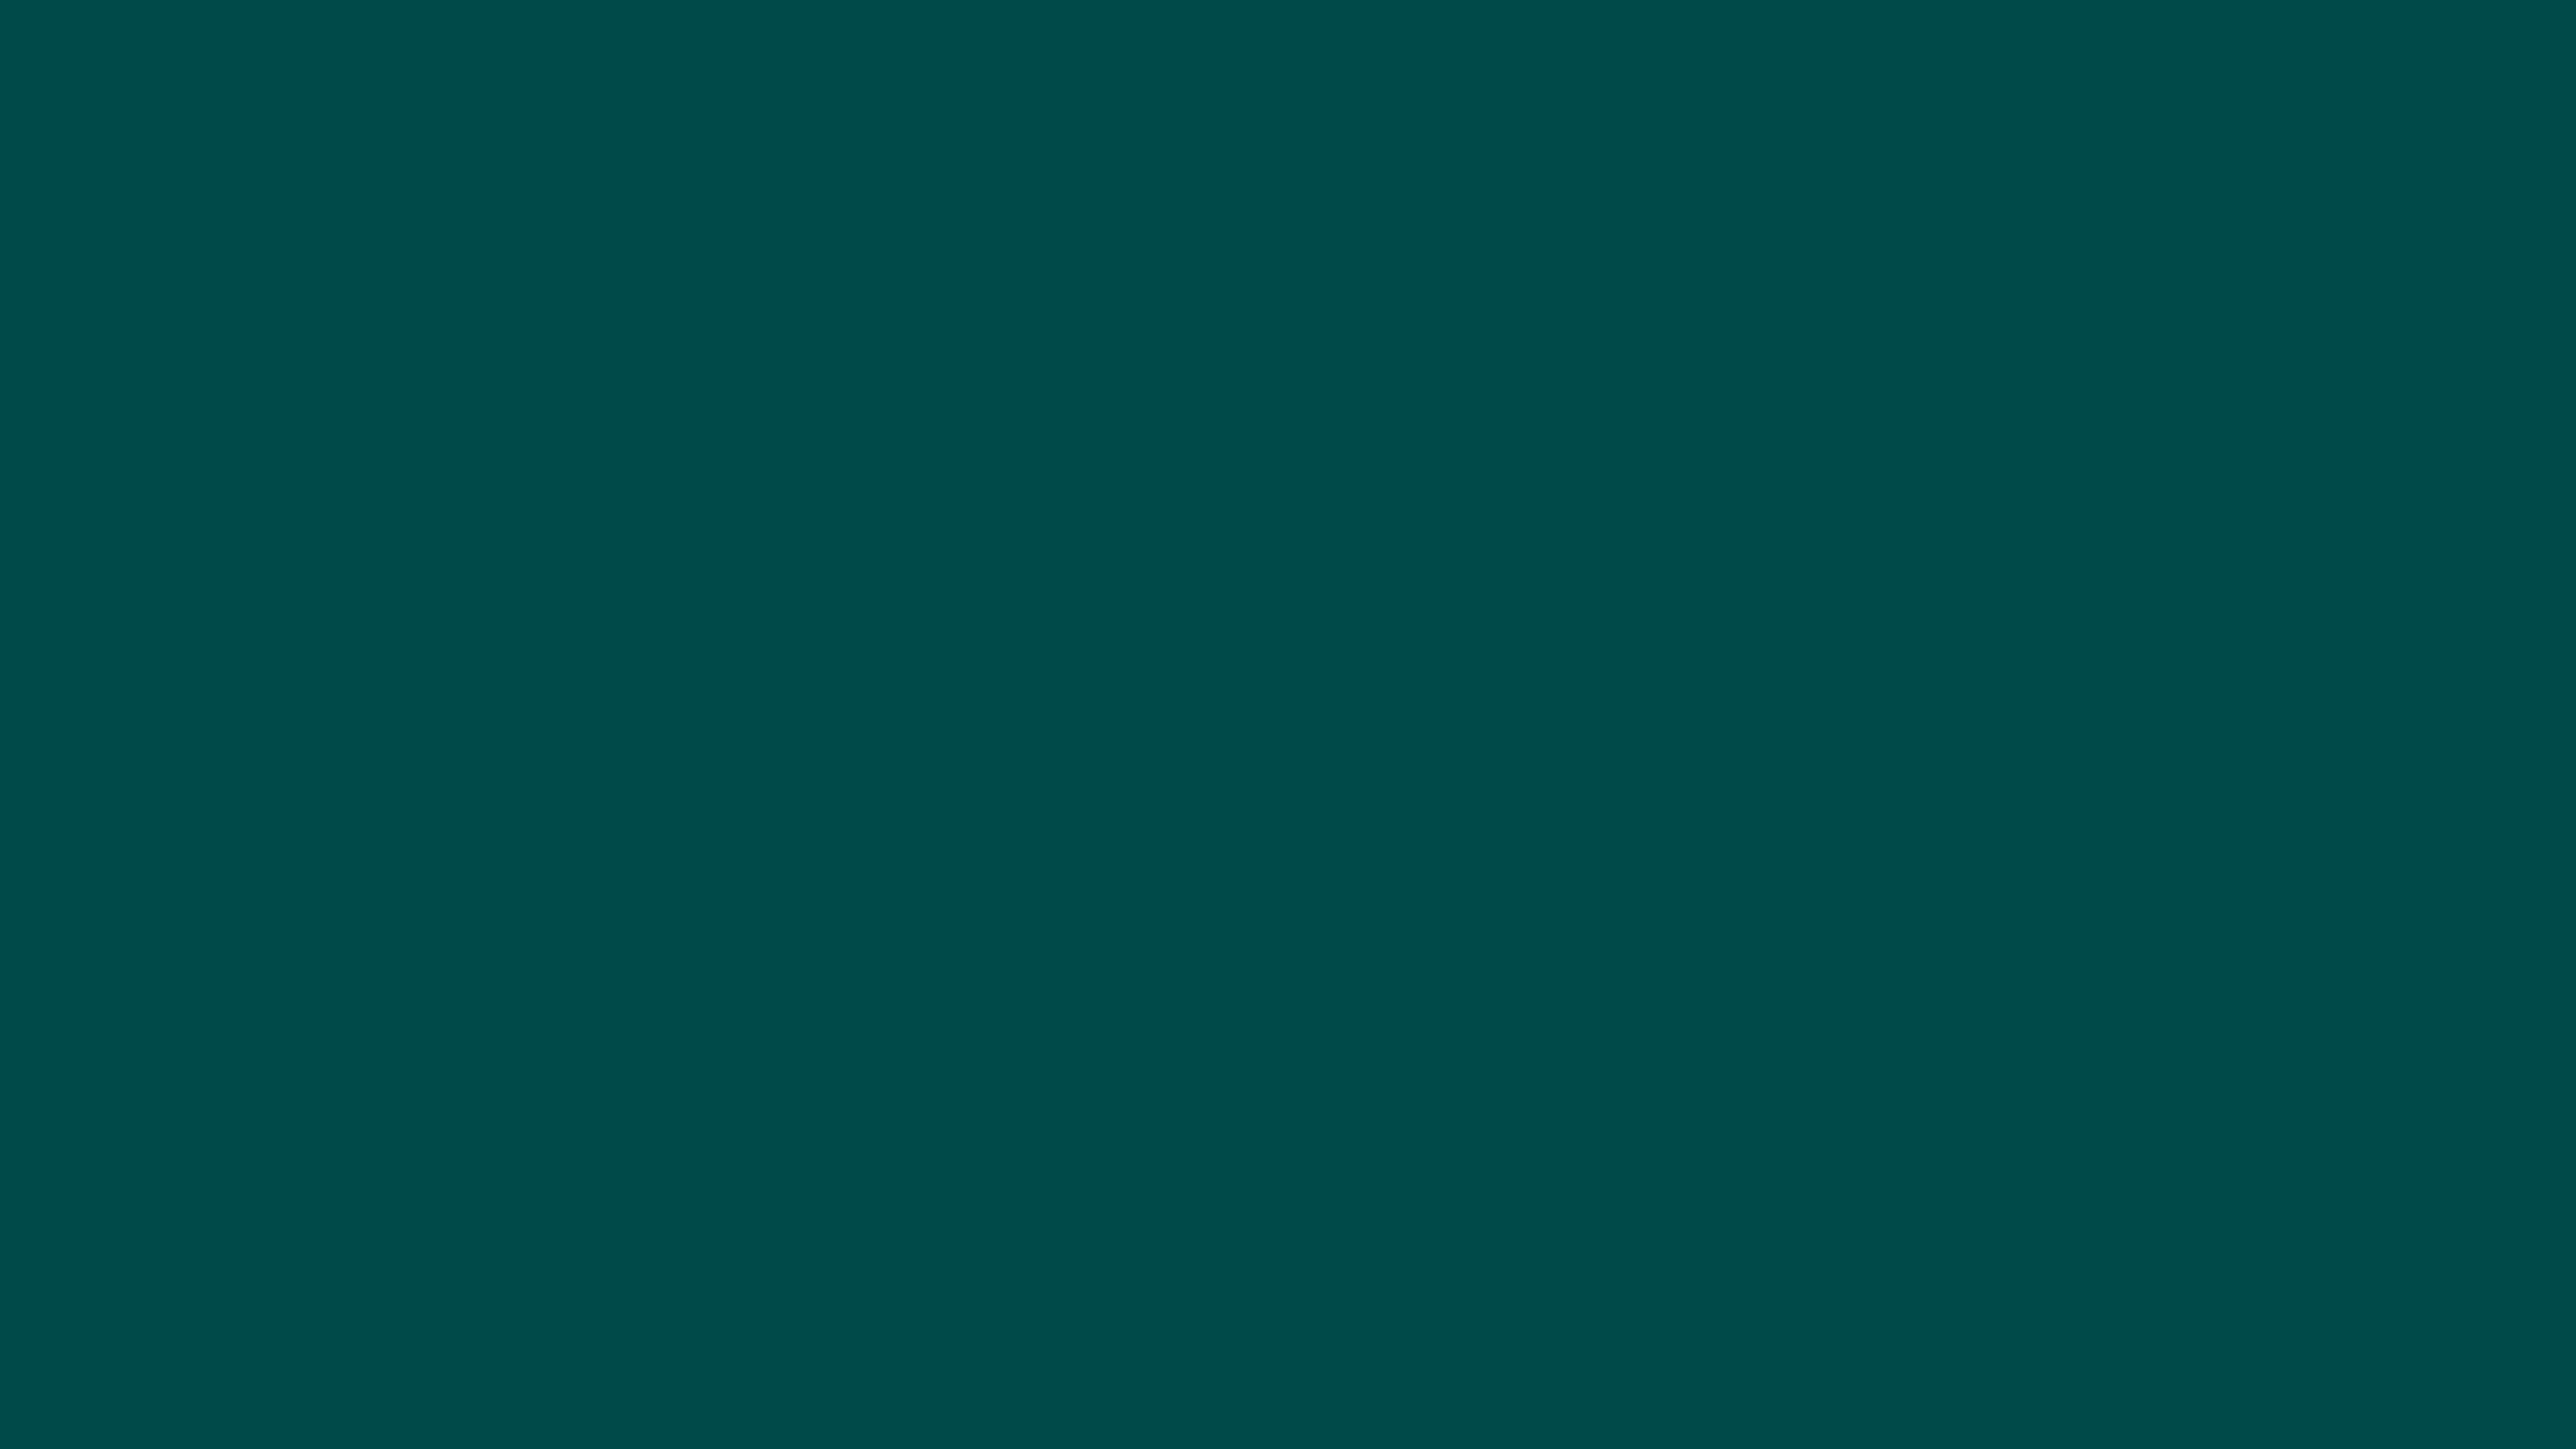 5120x2880 Deep Jungle Green Solid Color Background